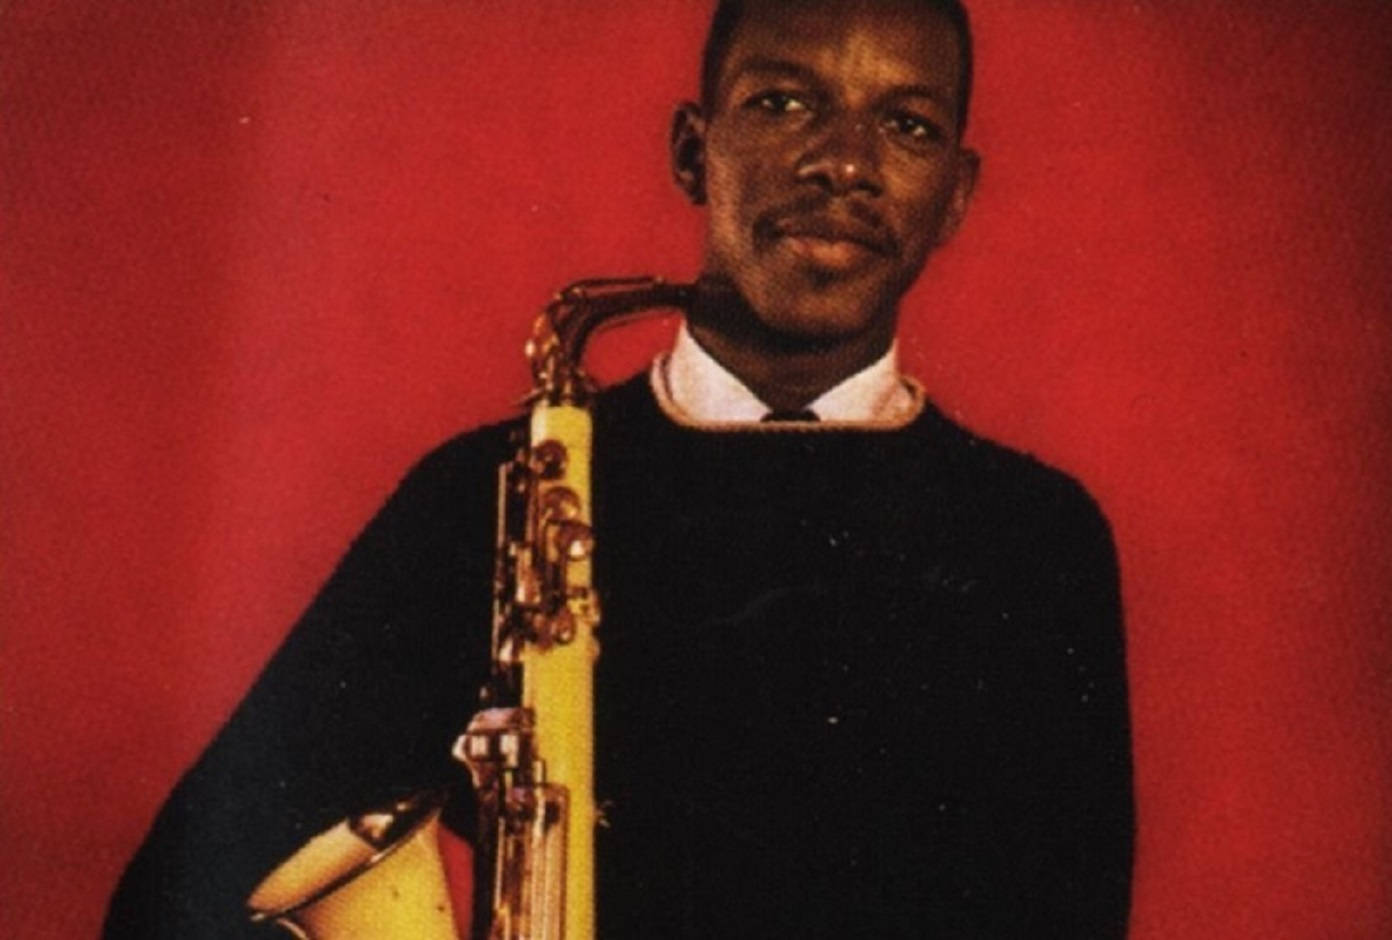 Ornette Coleman Photograph In Red Wallpaper